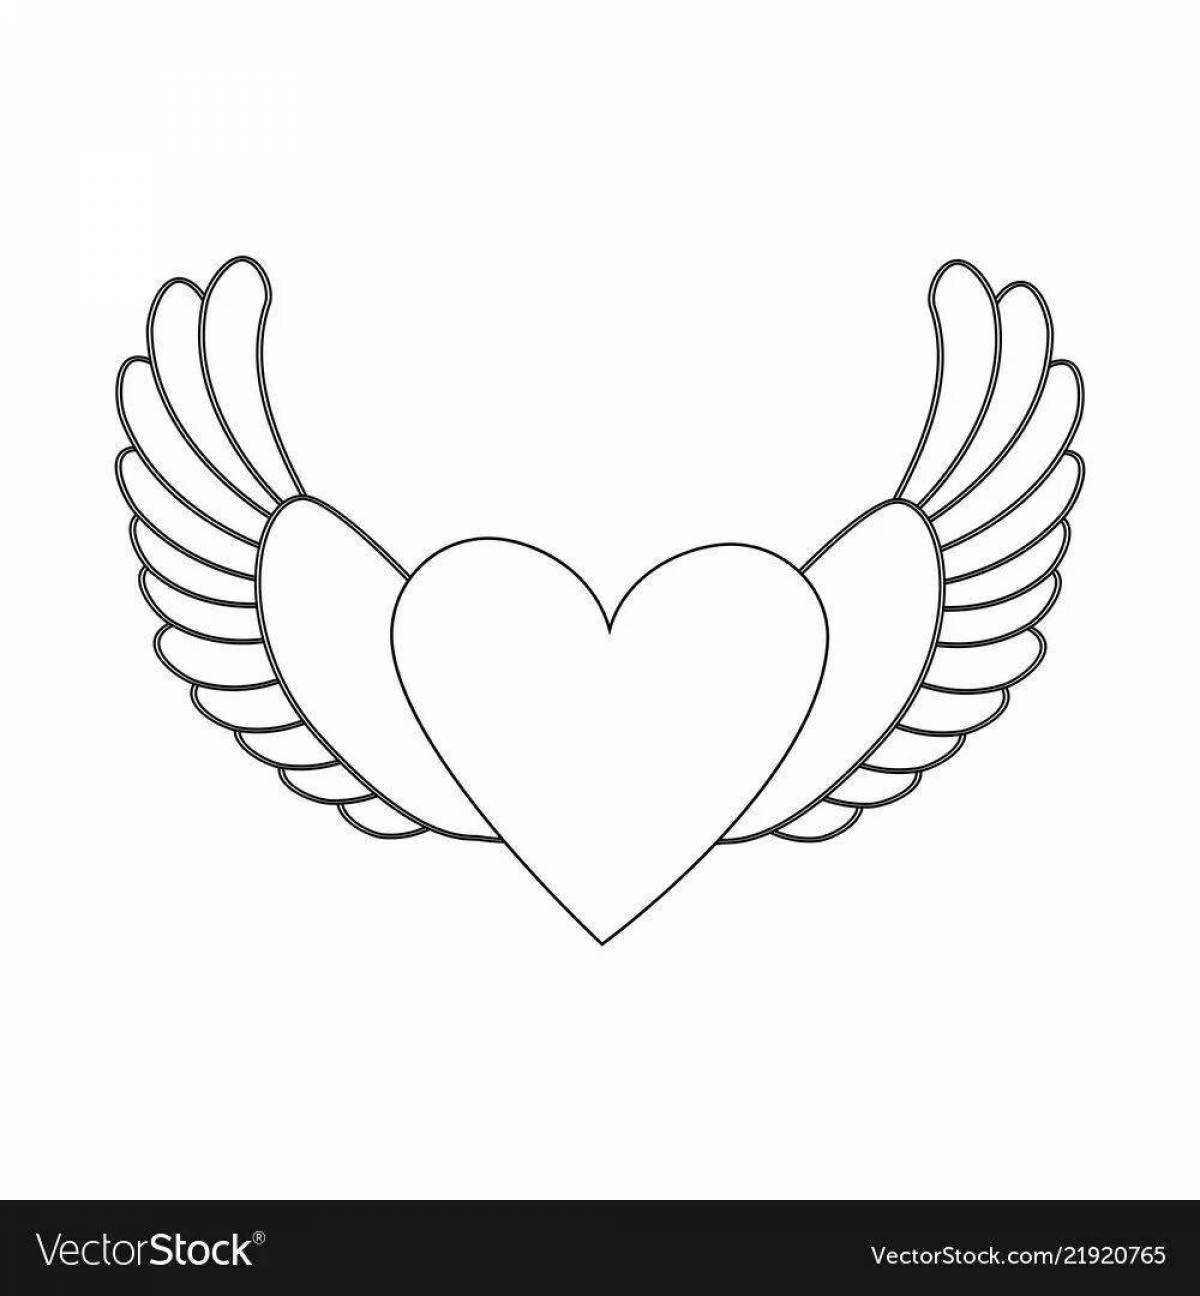 Lovely coloring heart with wings